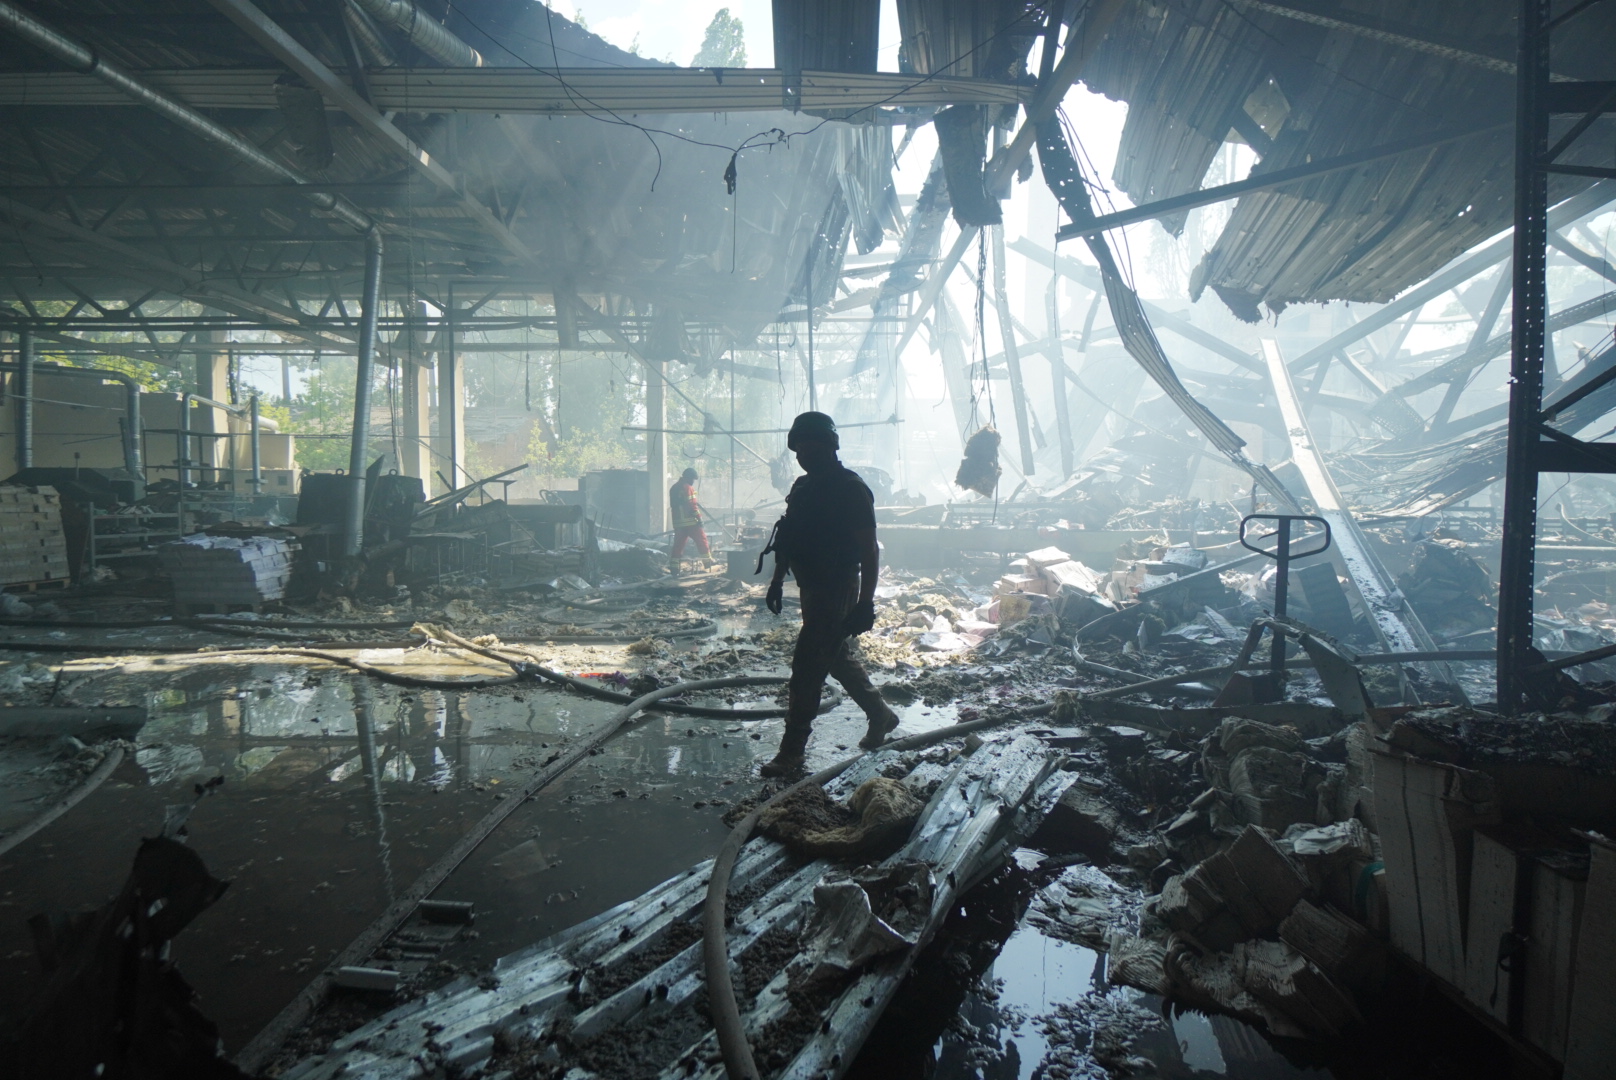 Printing house in Kharkiv damaged during a massive Russian missile attack on May 23 / Photo: Ivan Samoilov for Gwara Media